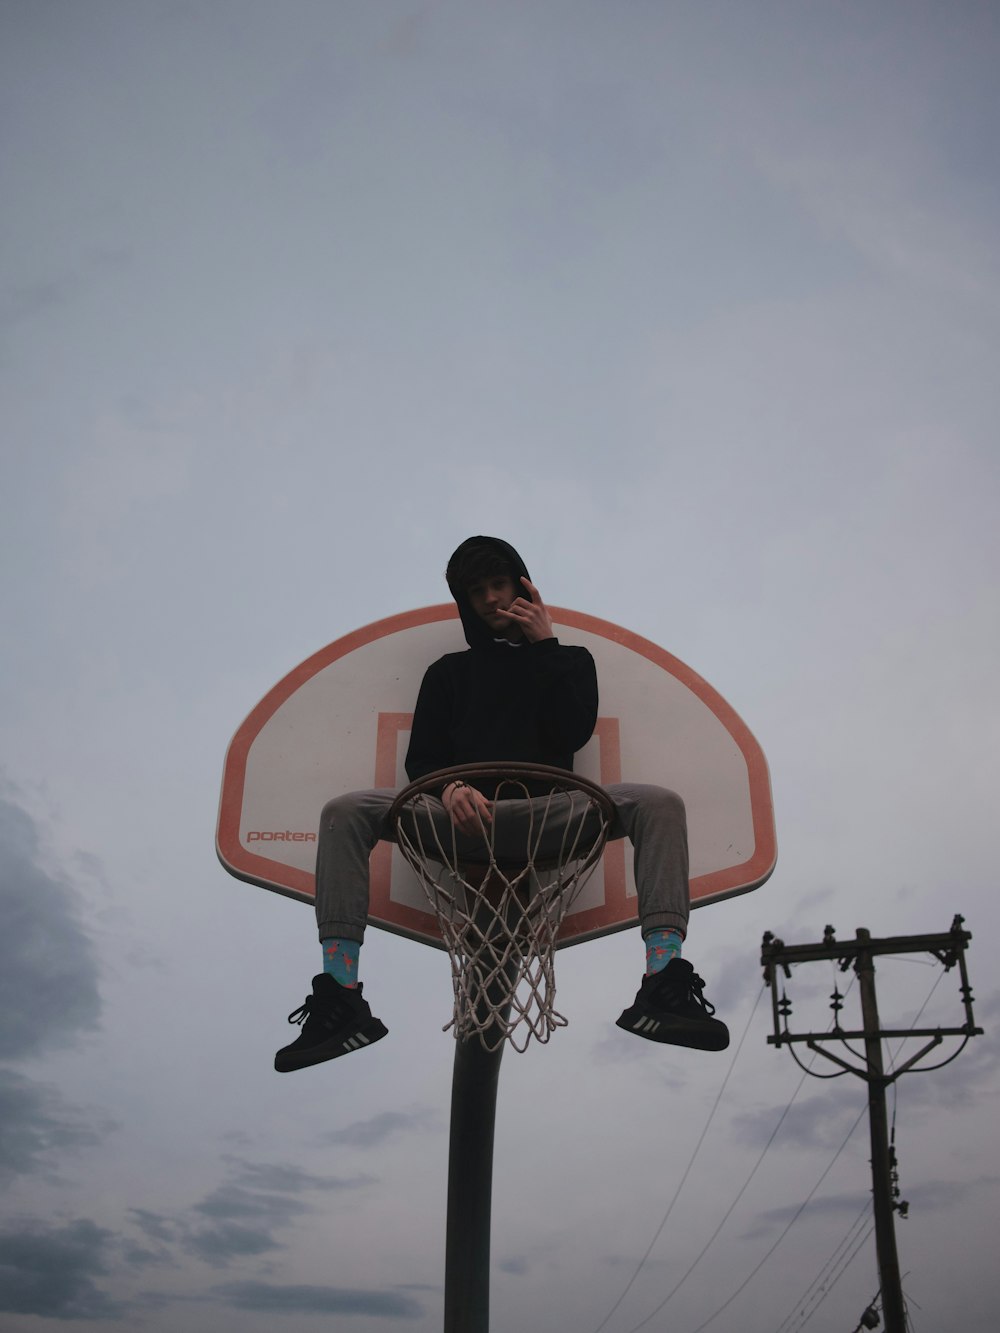 man sitting on red and white basketball hoop